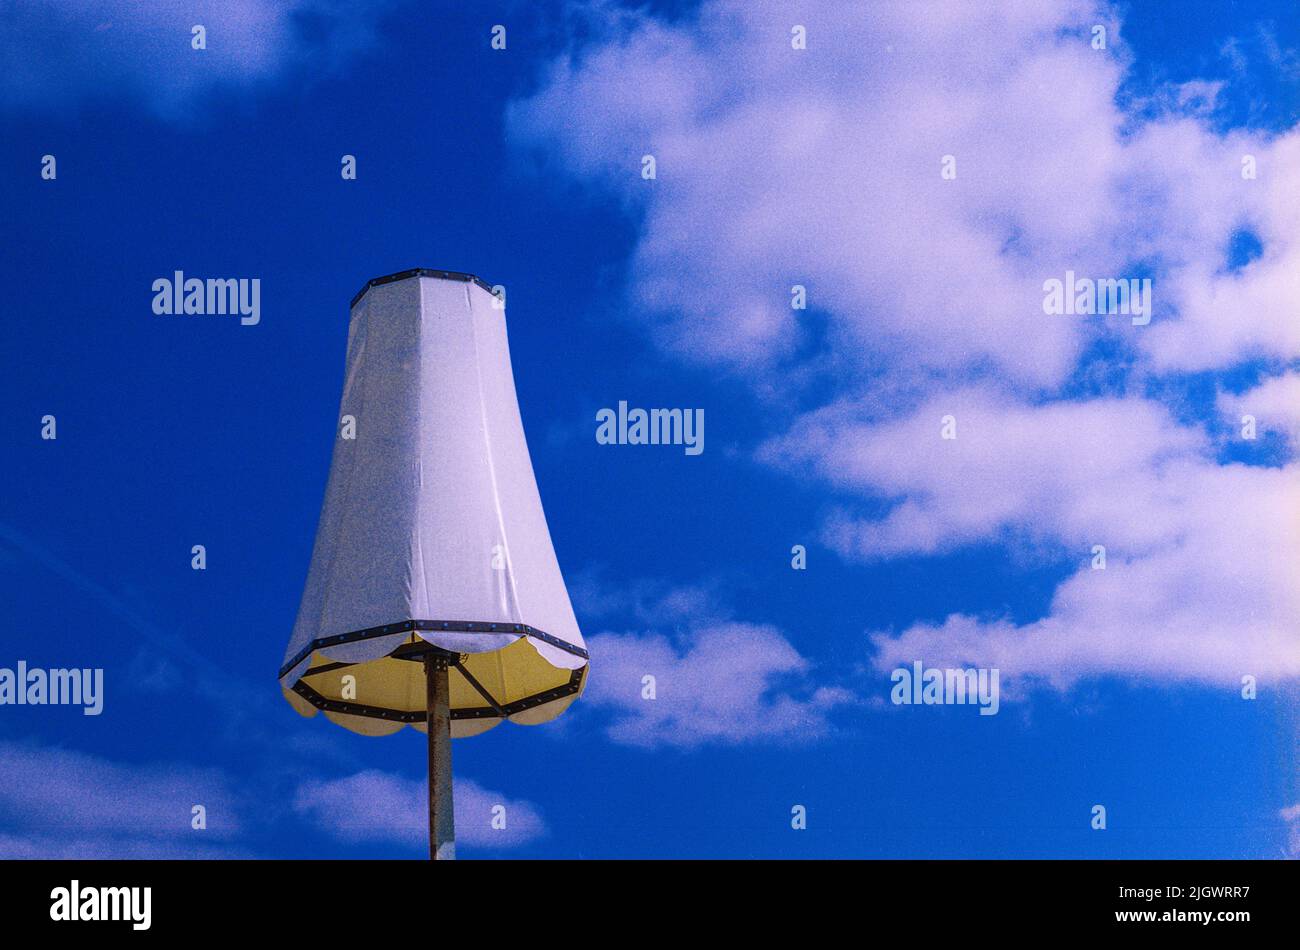 Rotterdam, Netherlands. Lampshade on a Pole against a Blue Sky. An Industrial Piece of Art and Landmark inside Port of Rotterdam Harbour. Stock Photo